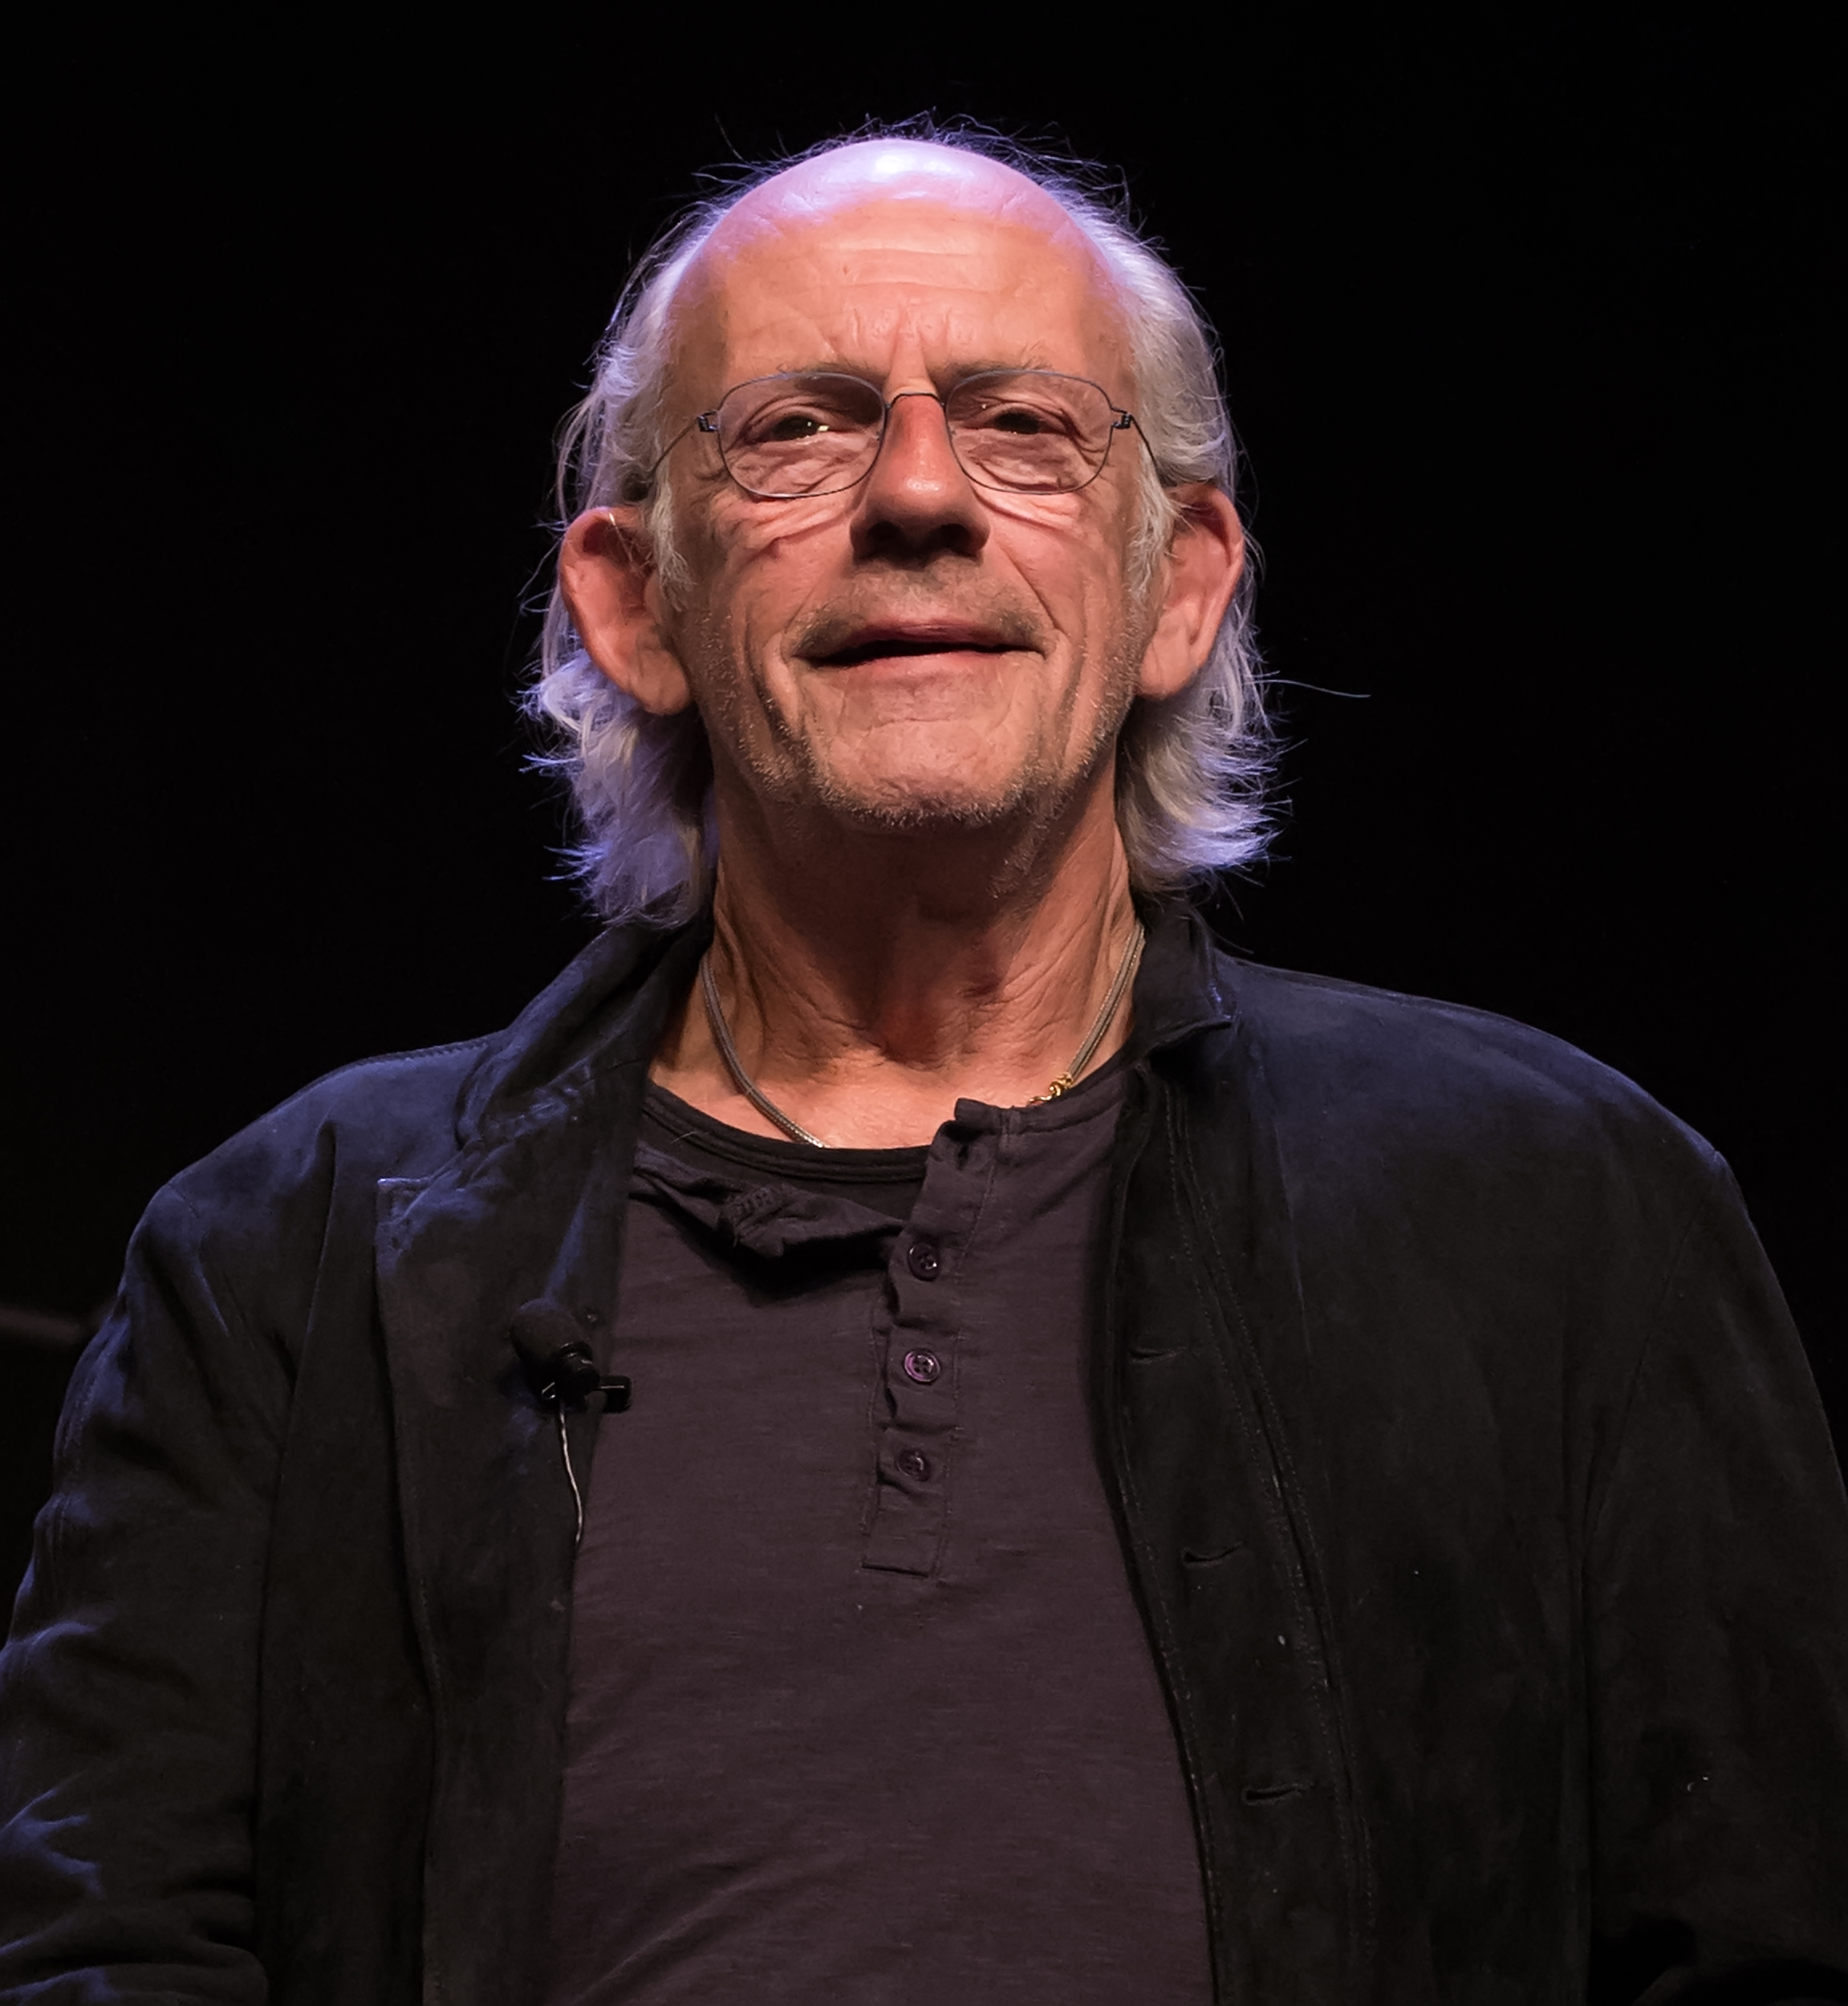 Christopher Lloyd attends "Great Scott! Revisiting Back to the Future" Q&A discussion in Philadelphia, Pennsylvania on June 4, 2016 | Source: Getty Images